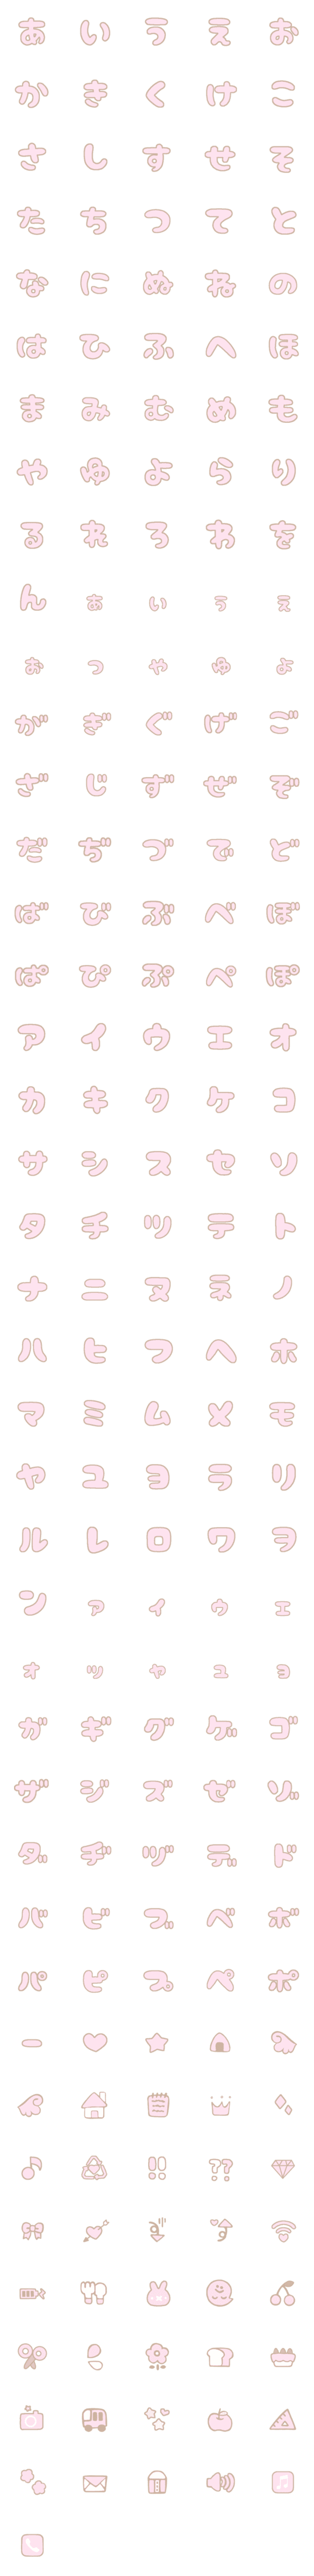 [LINE絵文字]ゆるふわパステルデコ文字の画像一覧